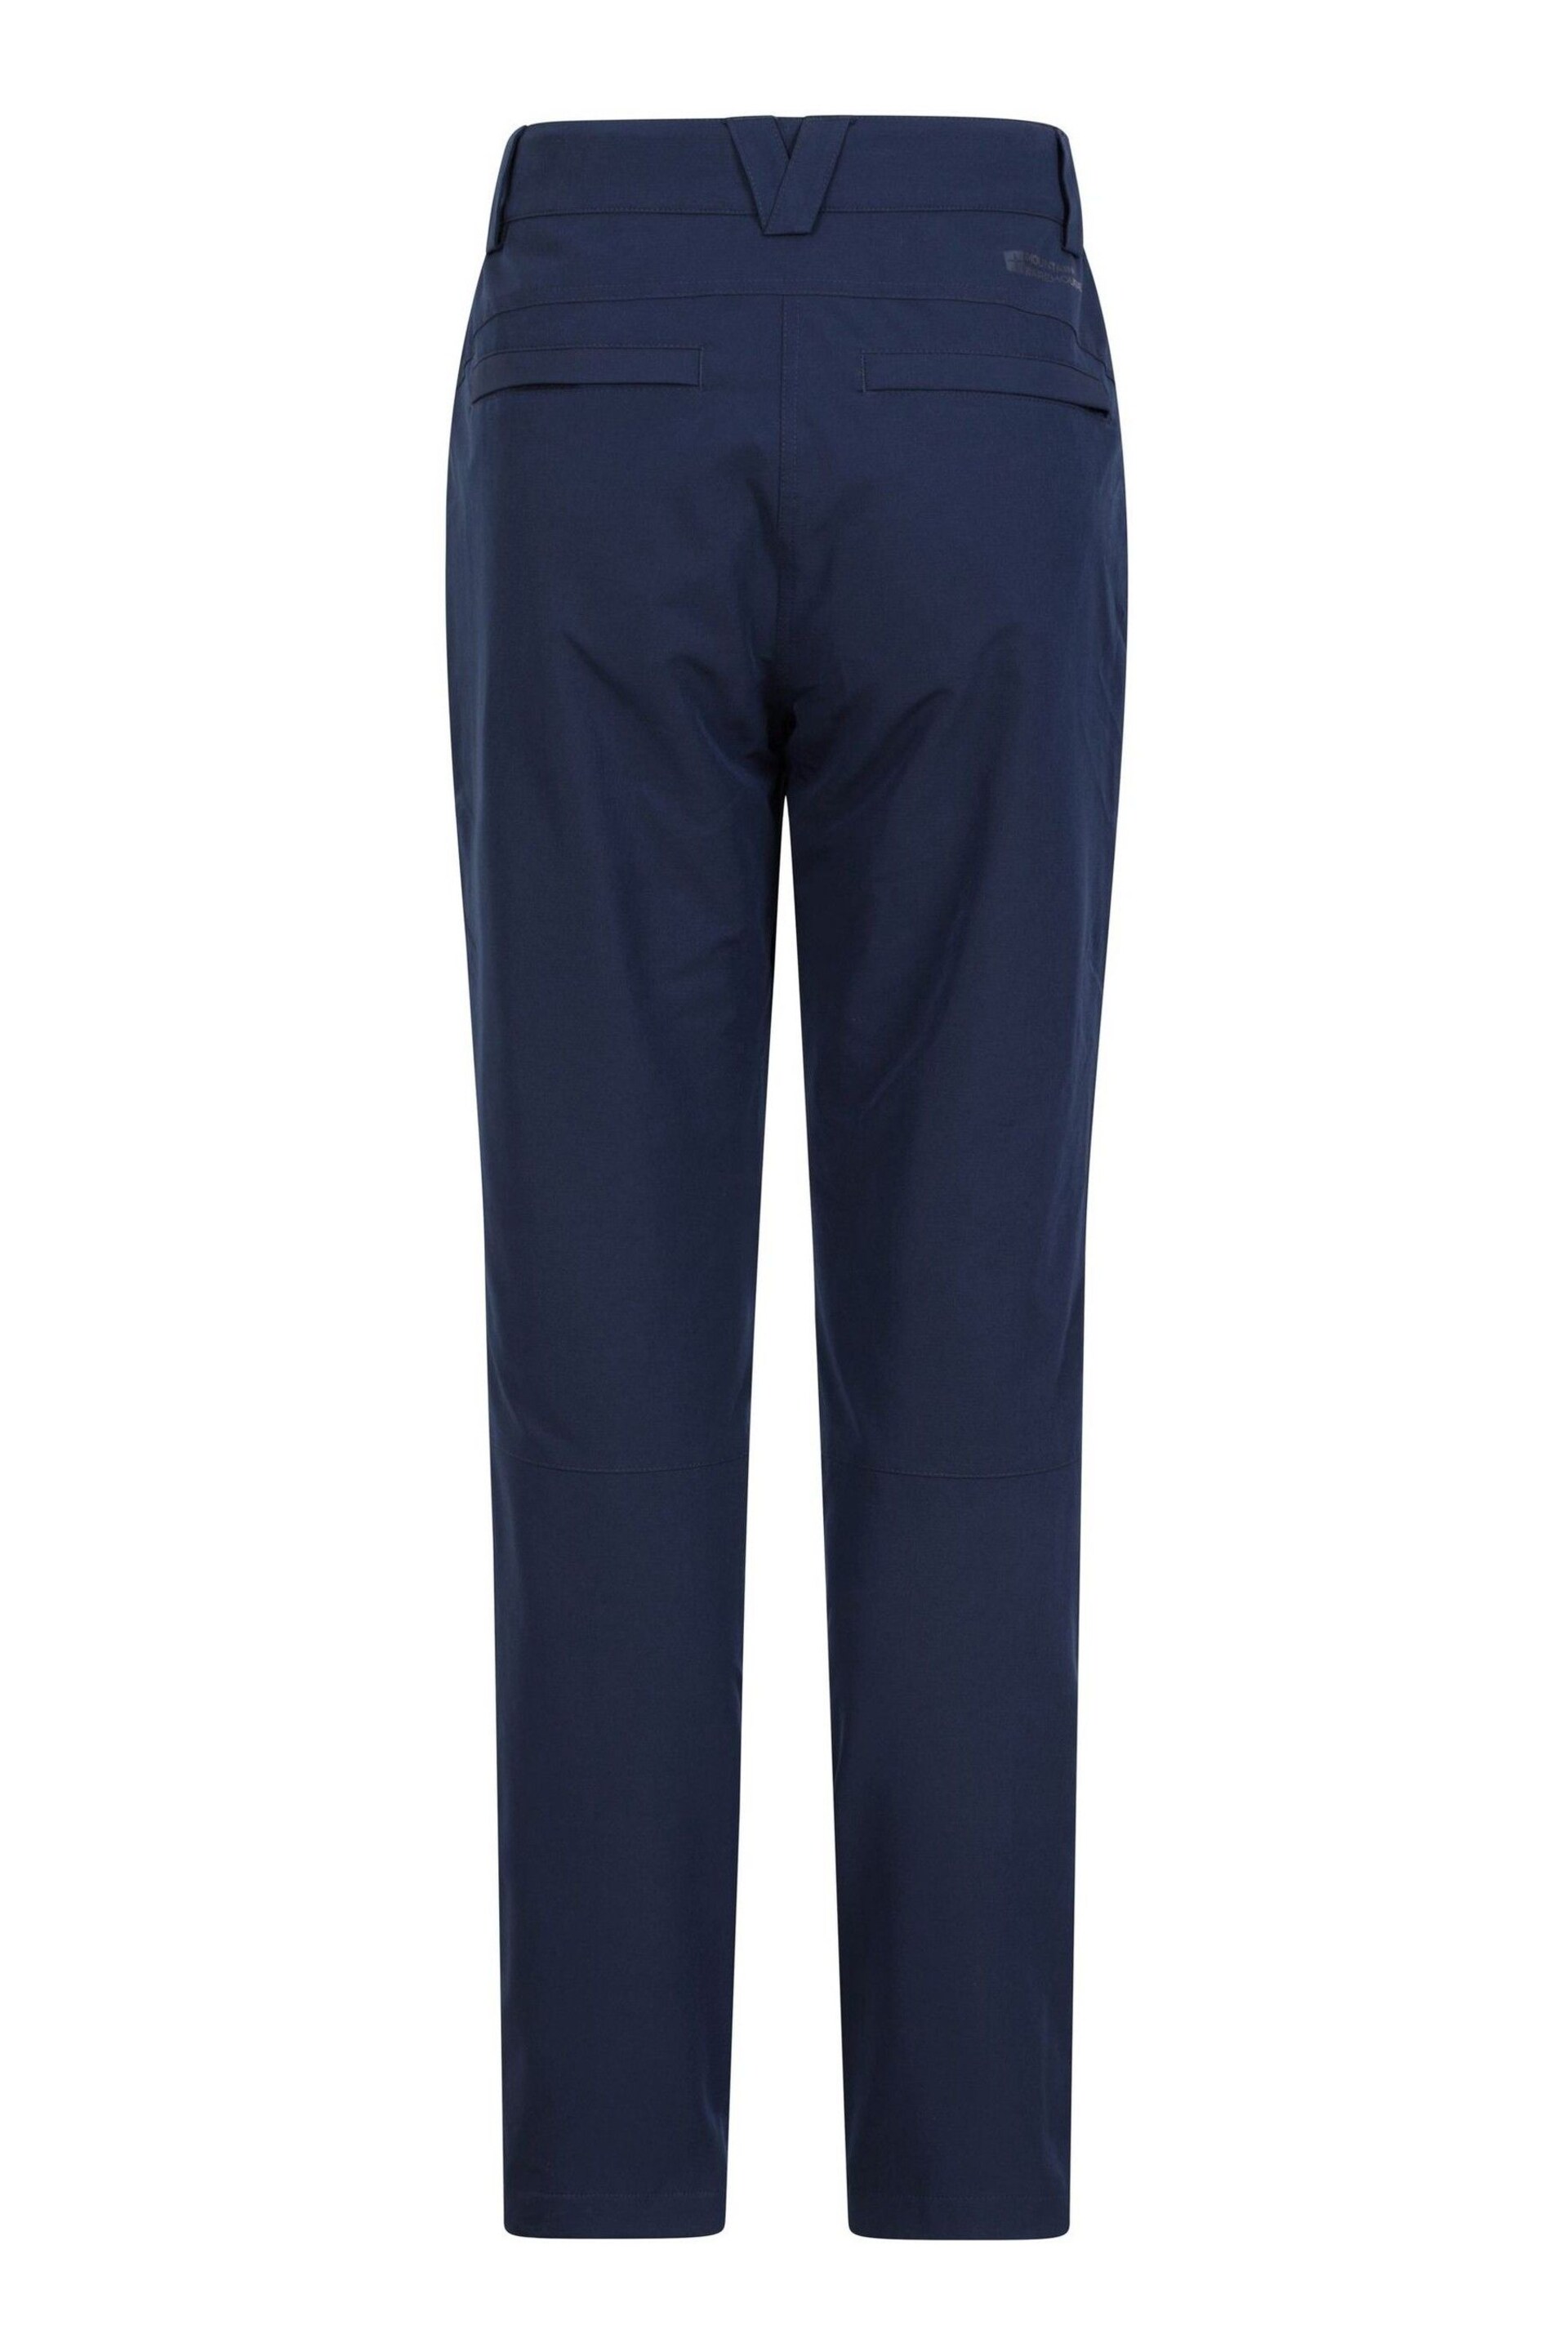 Mountain Warehouse Blue Womens Arctic II Thermal Fleece Lined Trousers - Image 3 of 5